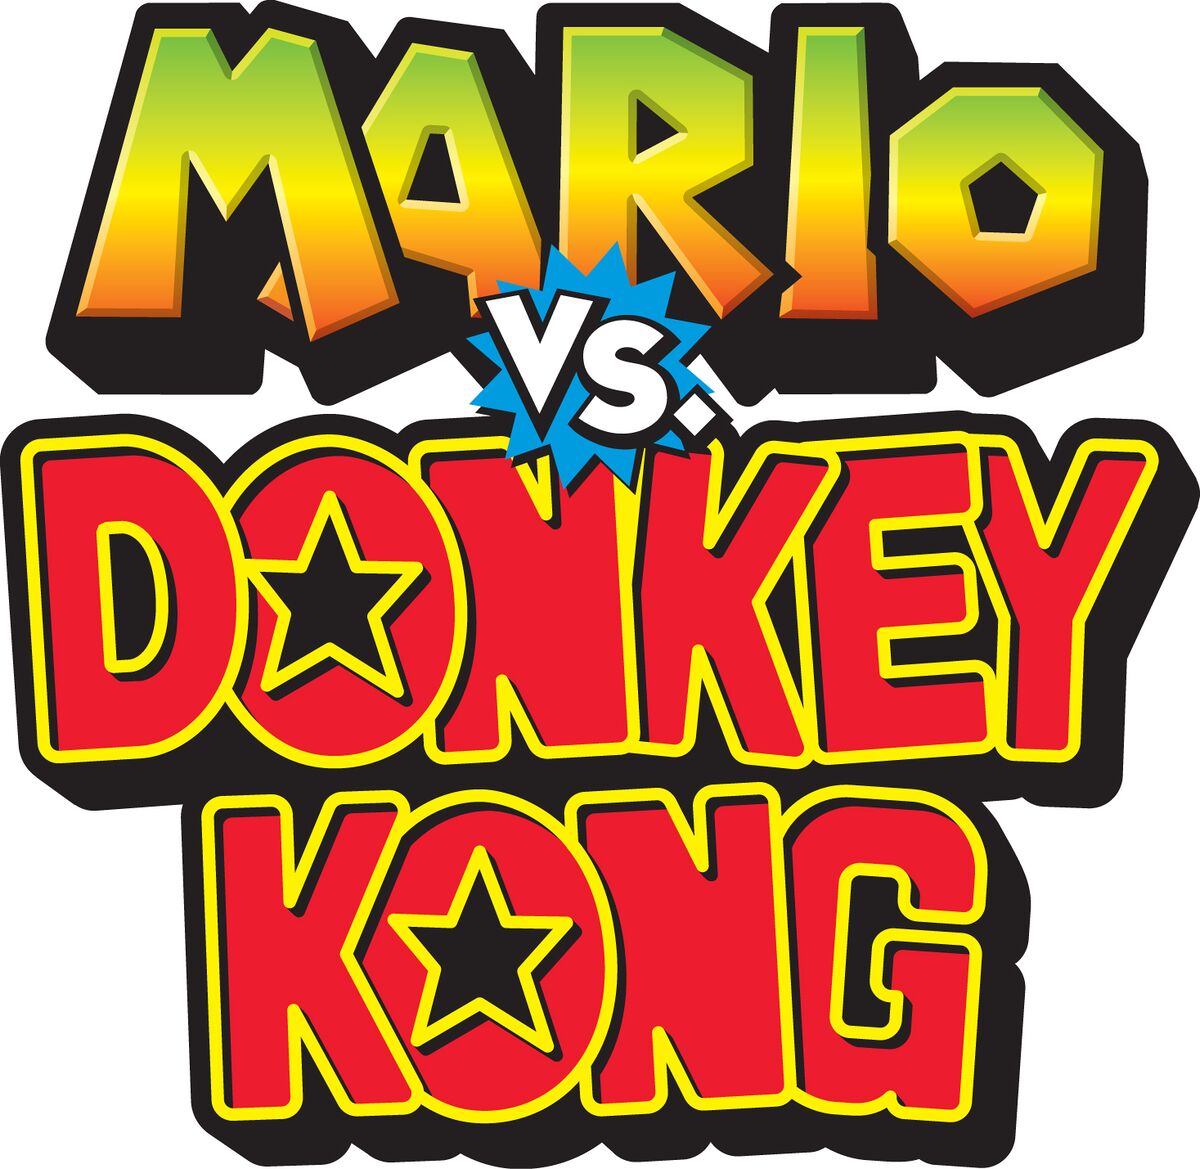 Mario vs. Donkey Kong (Holographic Cover Art Only) No Game